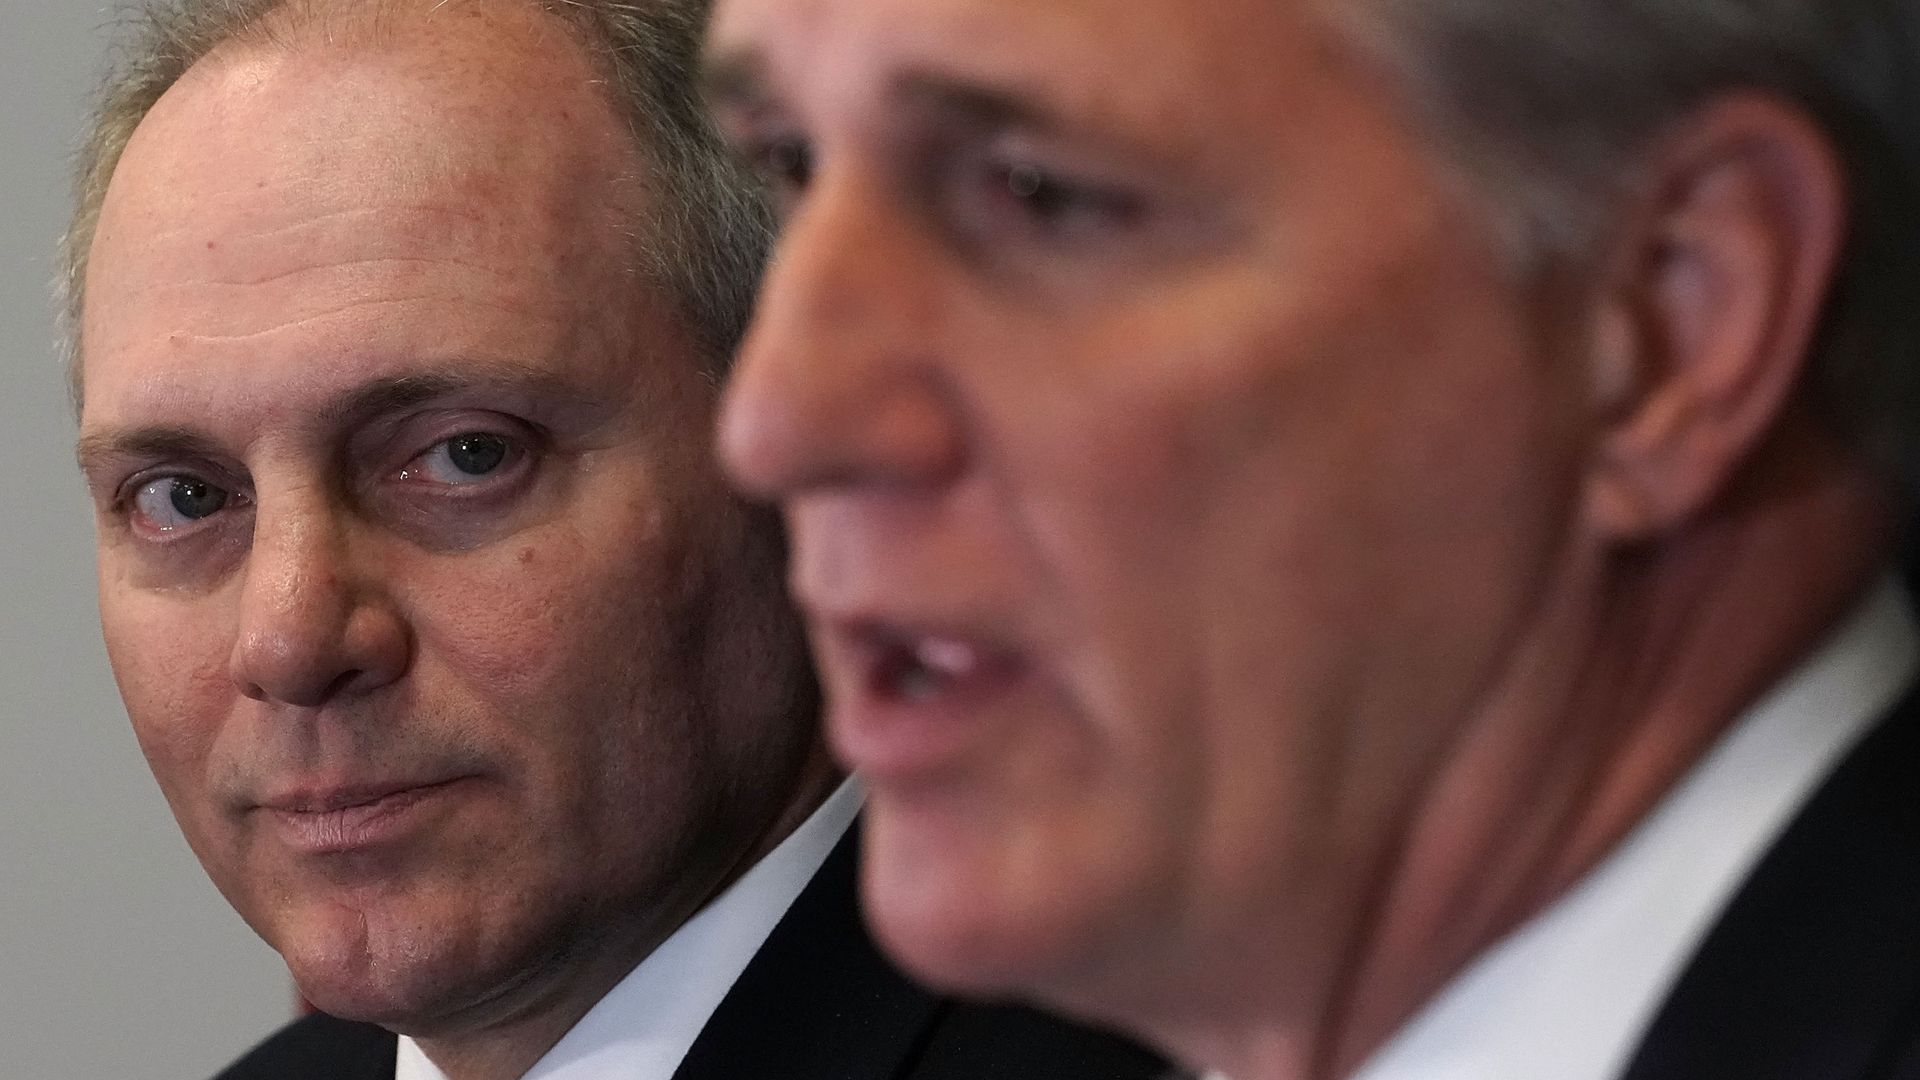 Rep. Steve Scalise in focus looking past Rep. Kevin McCarthy who is out of focus. 